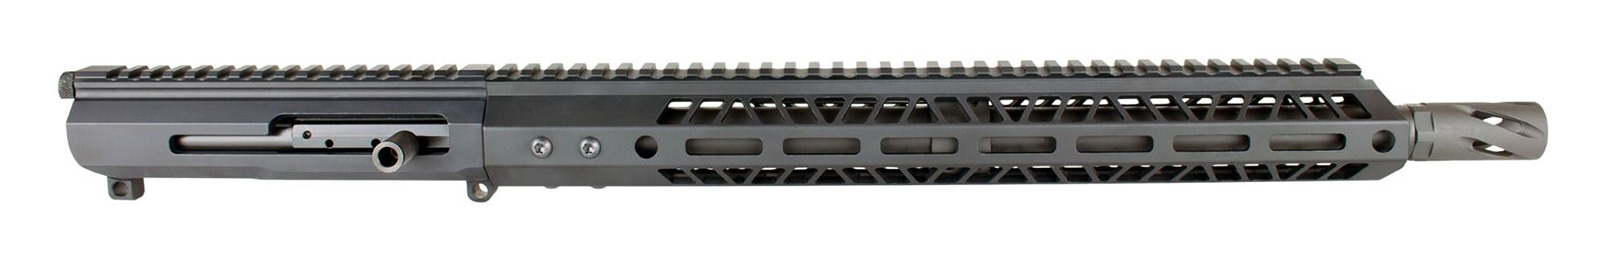 ar15-complete-upper-assembly-16-inch-50-cal-120-m-lok-160013